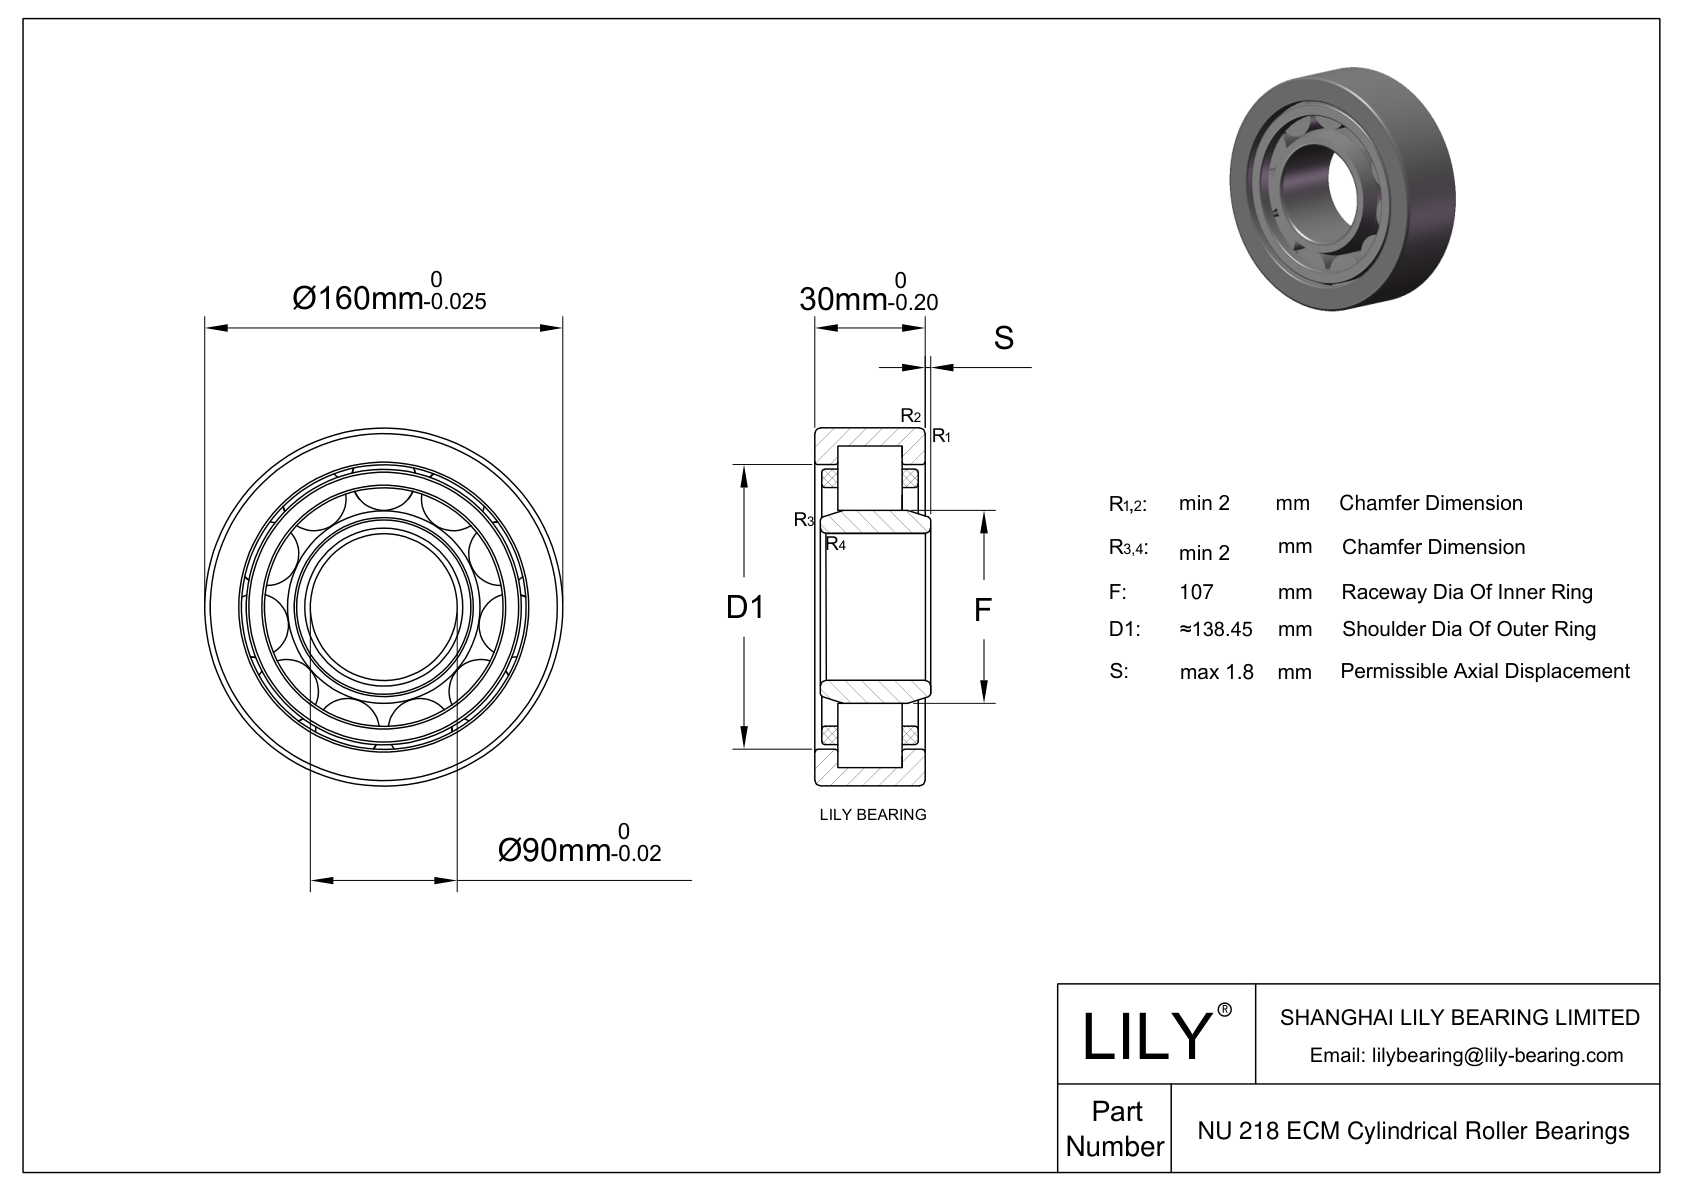 NU 218 ECM/C3VL0241 Ceramic Coated Cylindrical Roller Bearings cad drawing